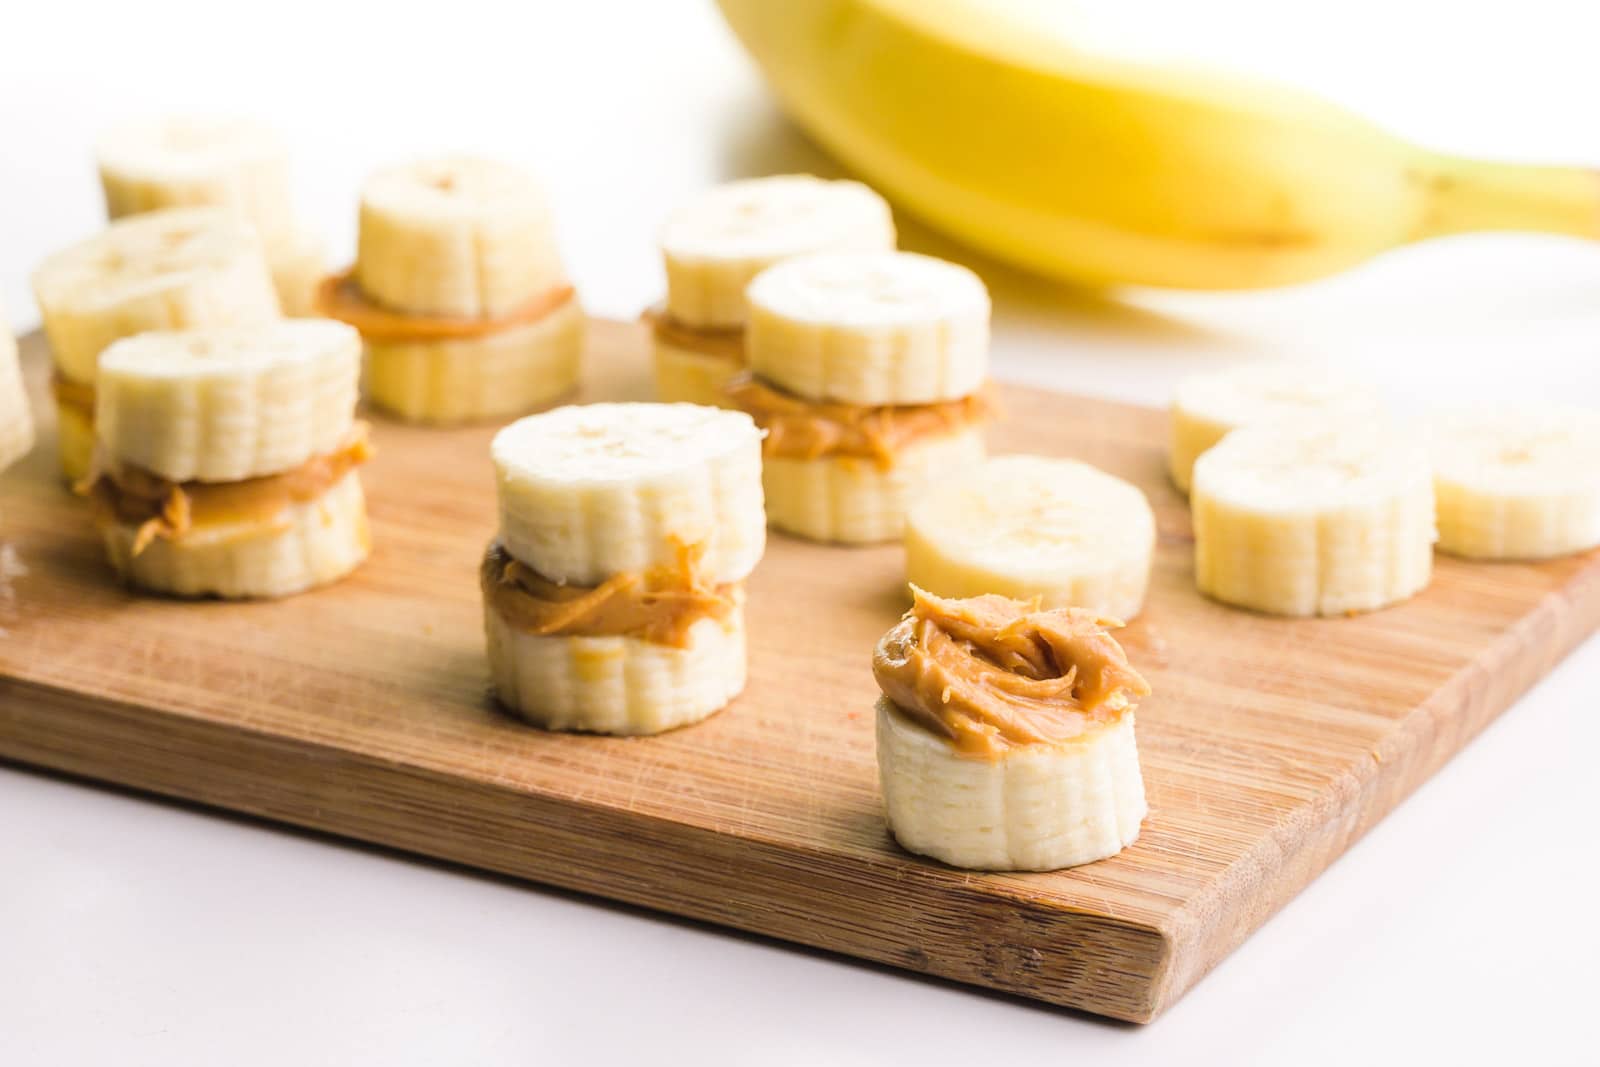 A cutting board holds several banana "sandwiches", with banana slices topped with peanut butter. There's a banana in the background.